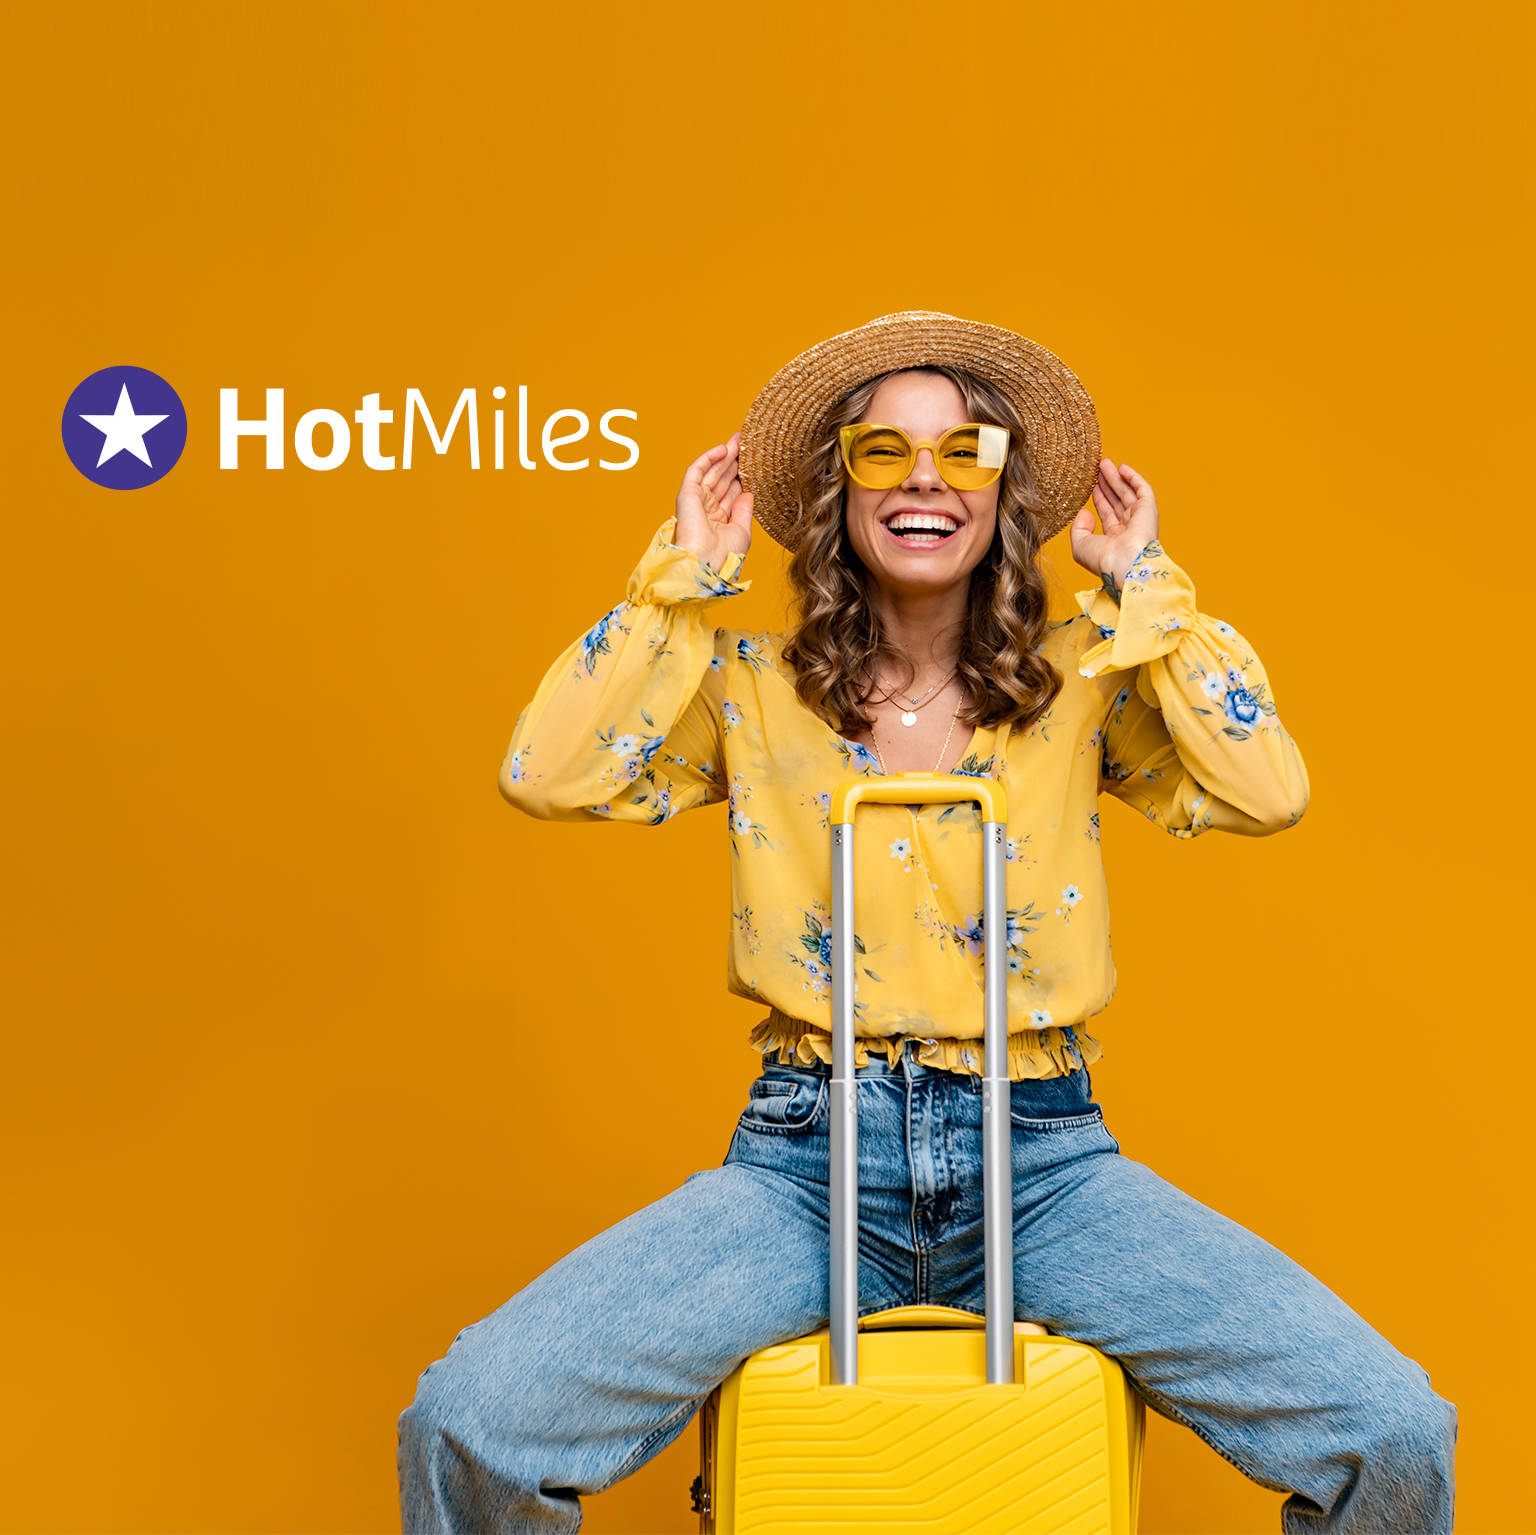 HotMiles - H4 Hotel Solothurn